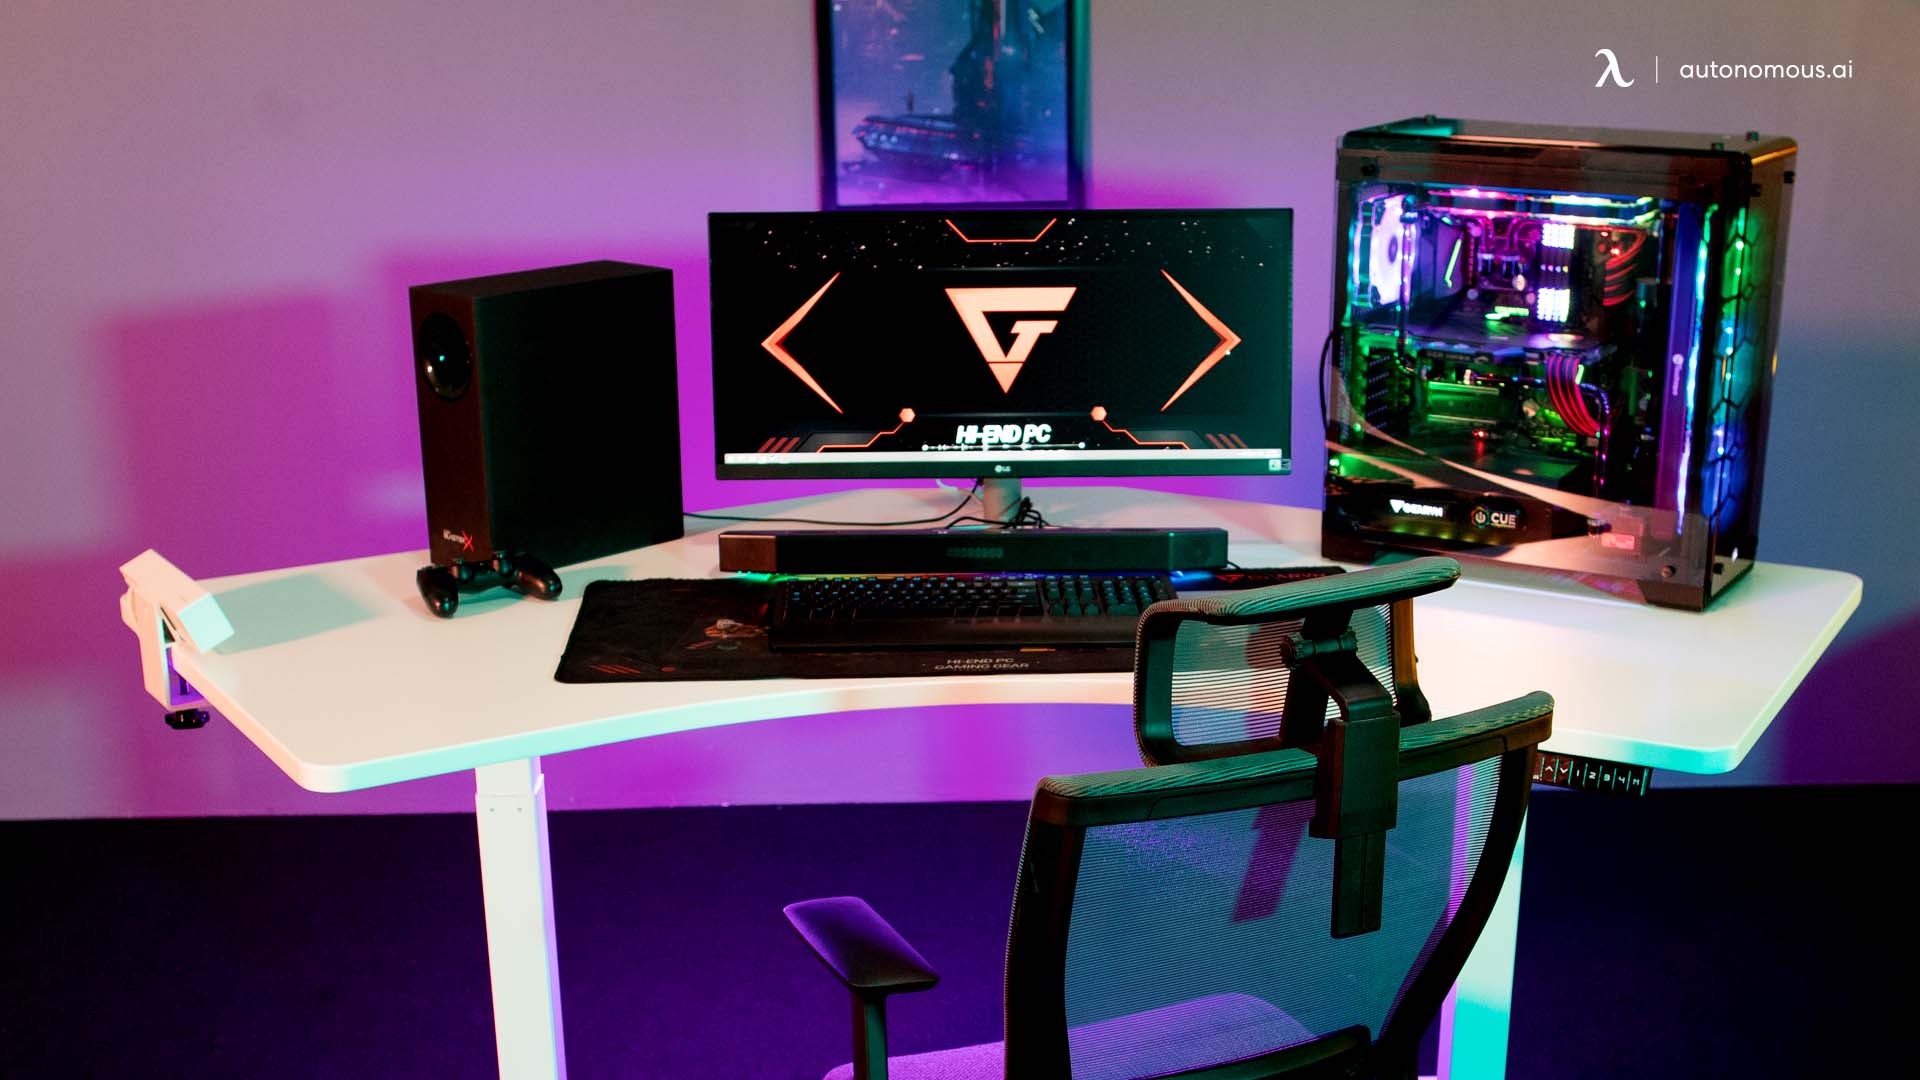 Pros and Cons of a Professional Gamer Setup